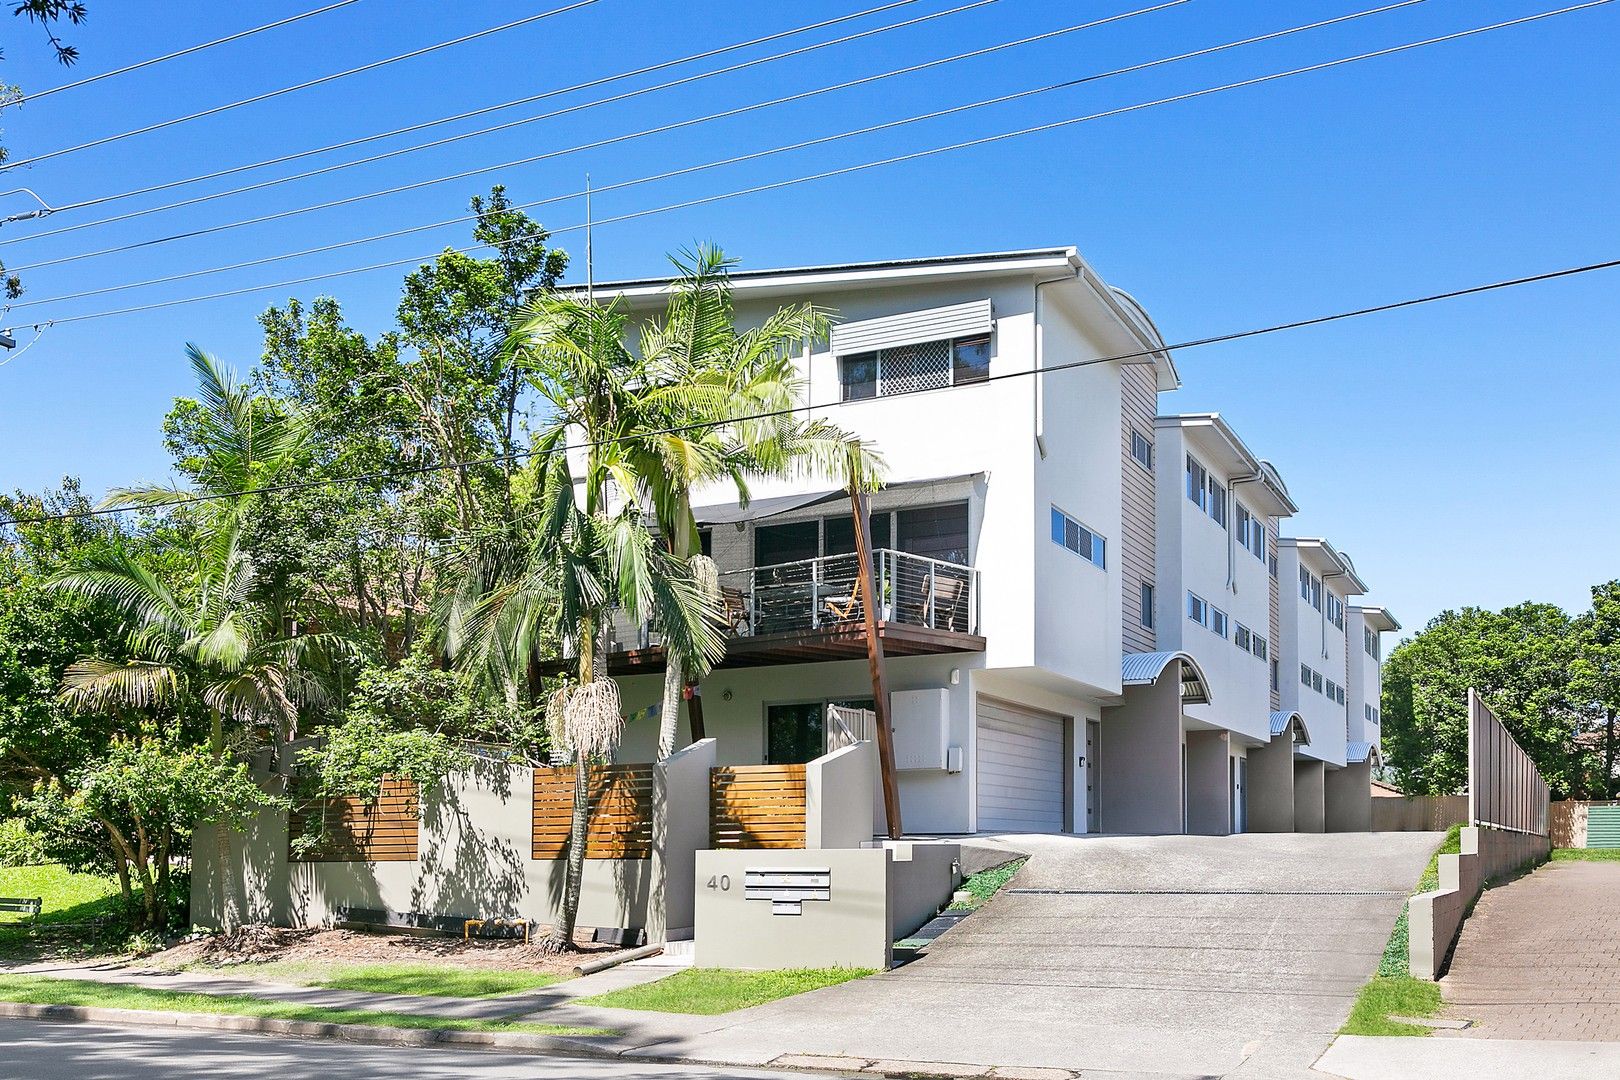 5/40 Dry Dock Road, Tweed Heads South NSW 2486, Image 0